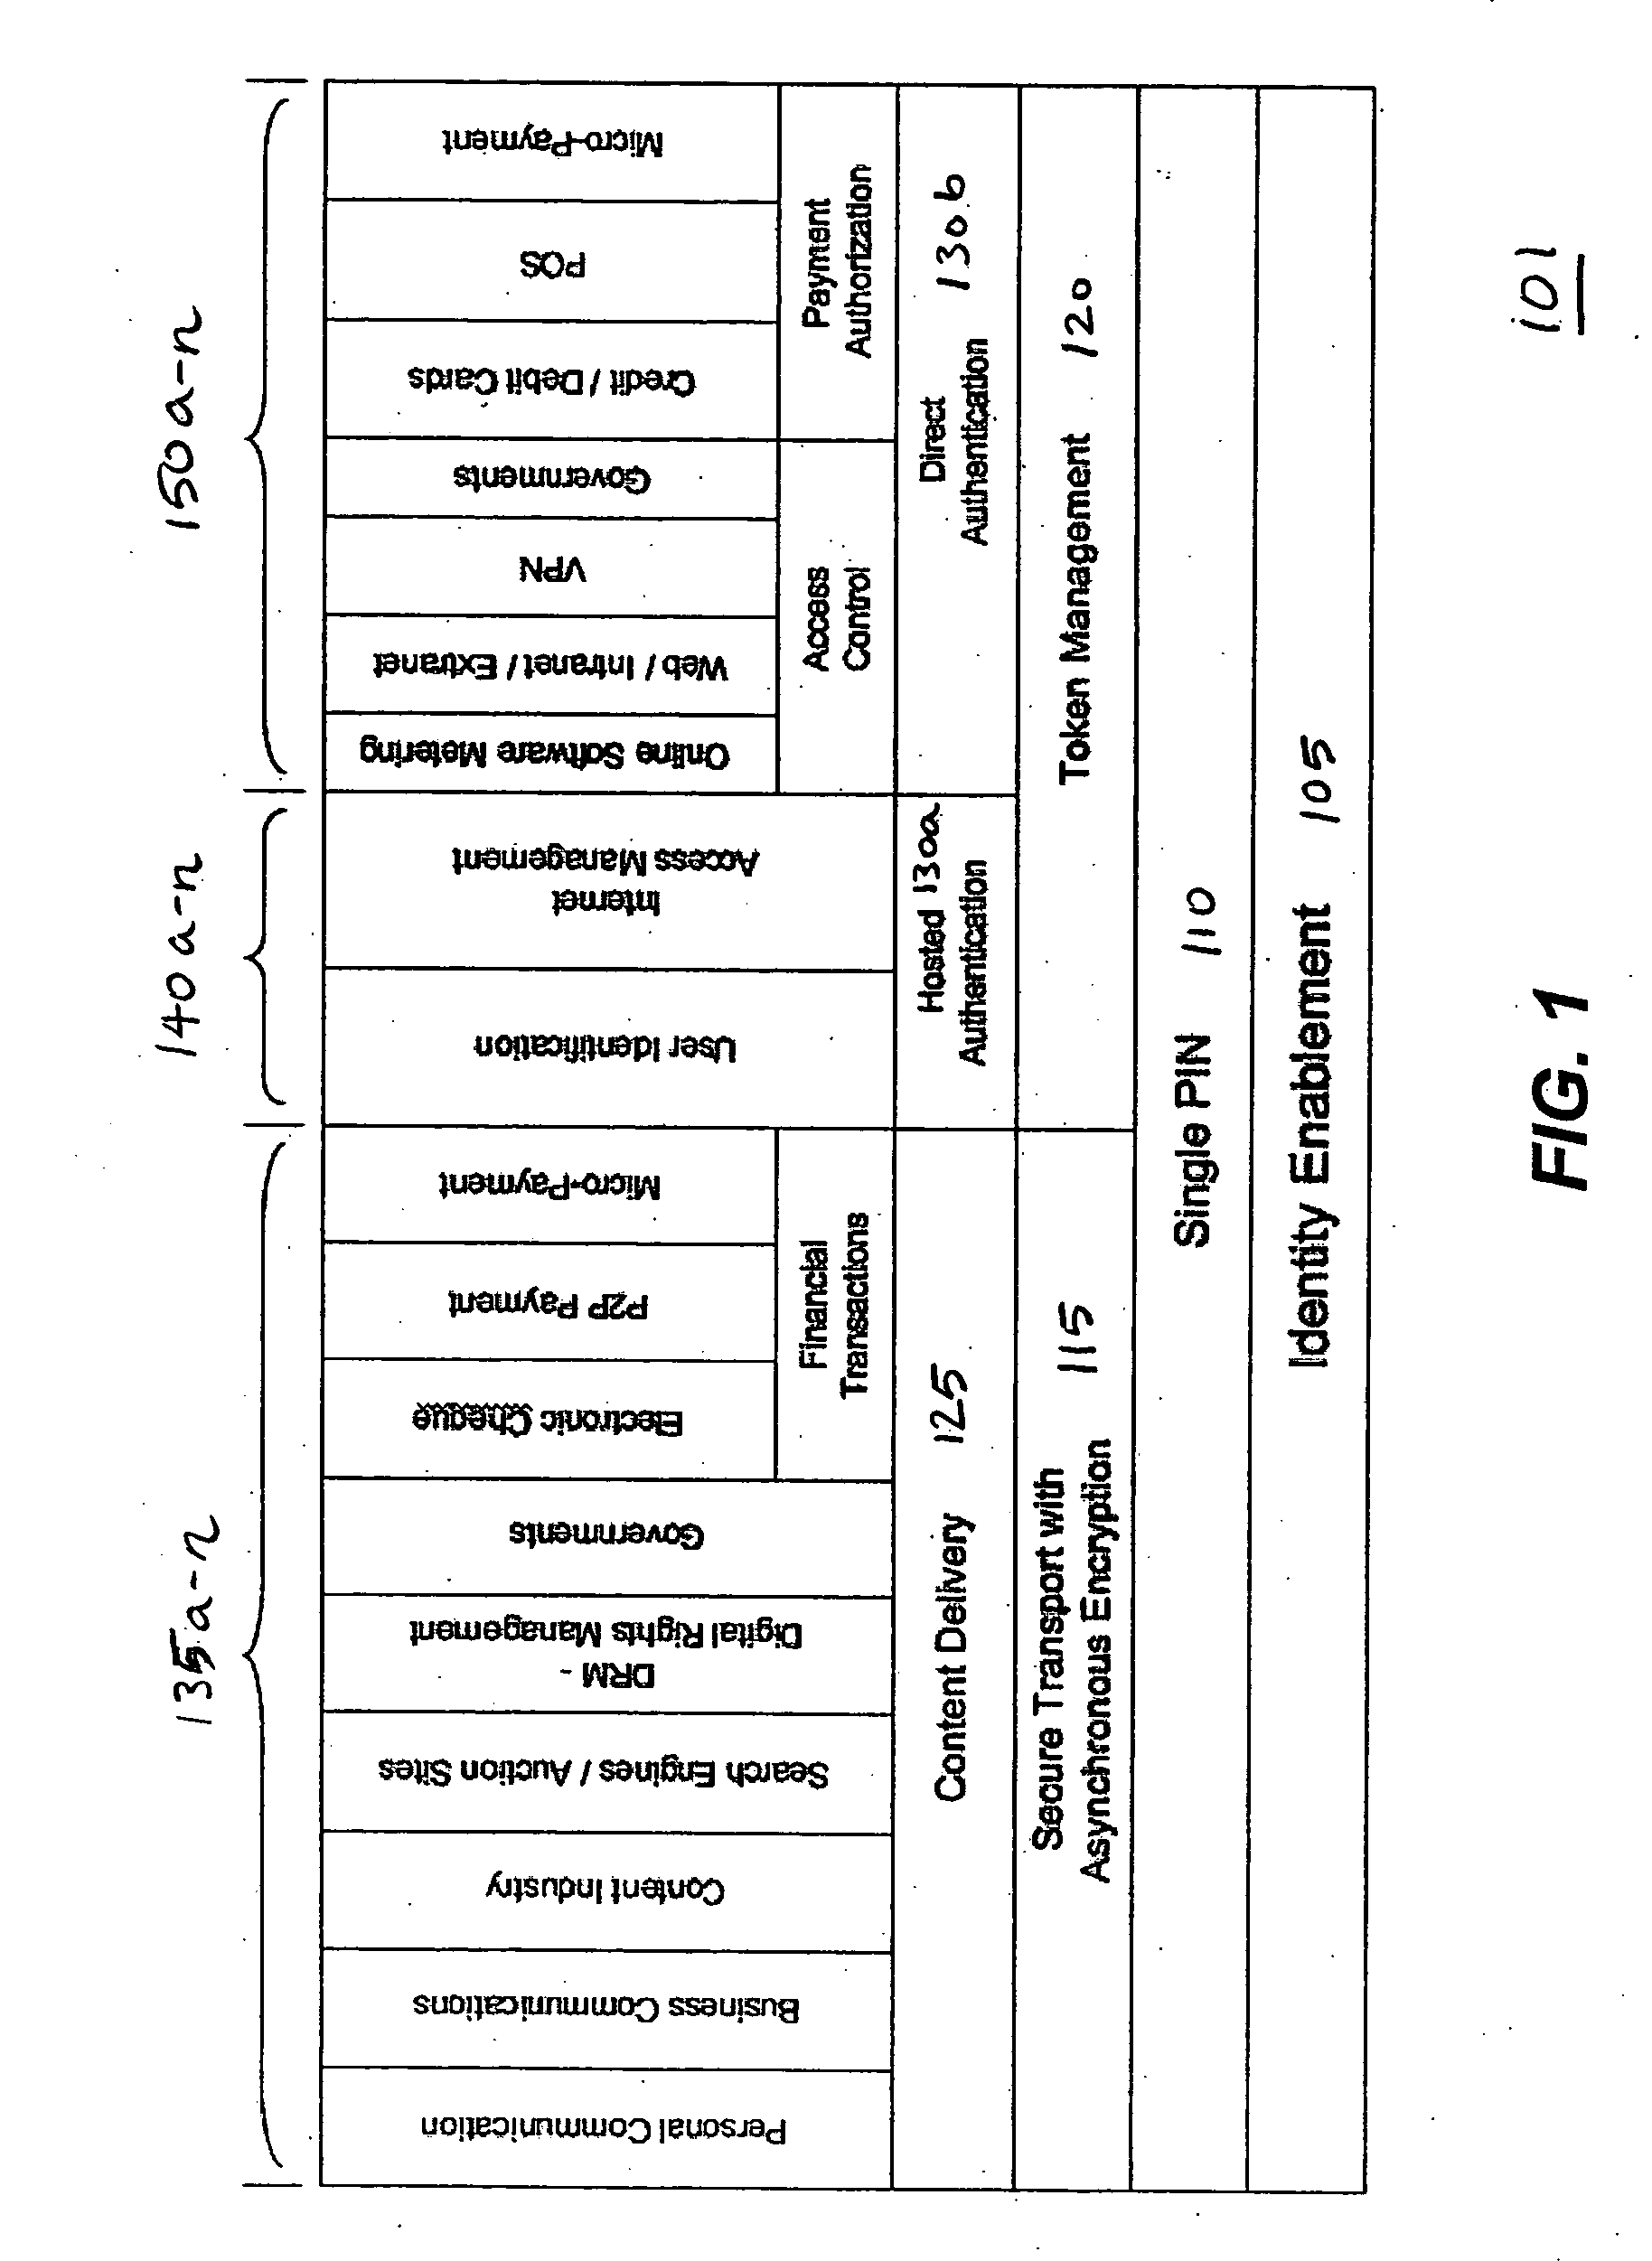 Asynchronous encryption for secured electronic communications